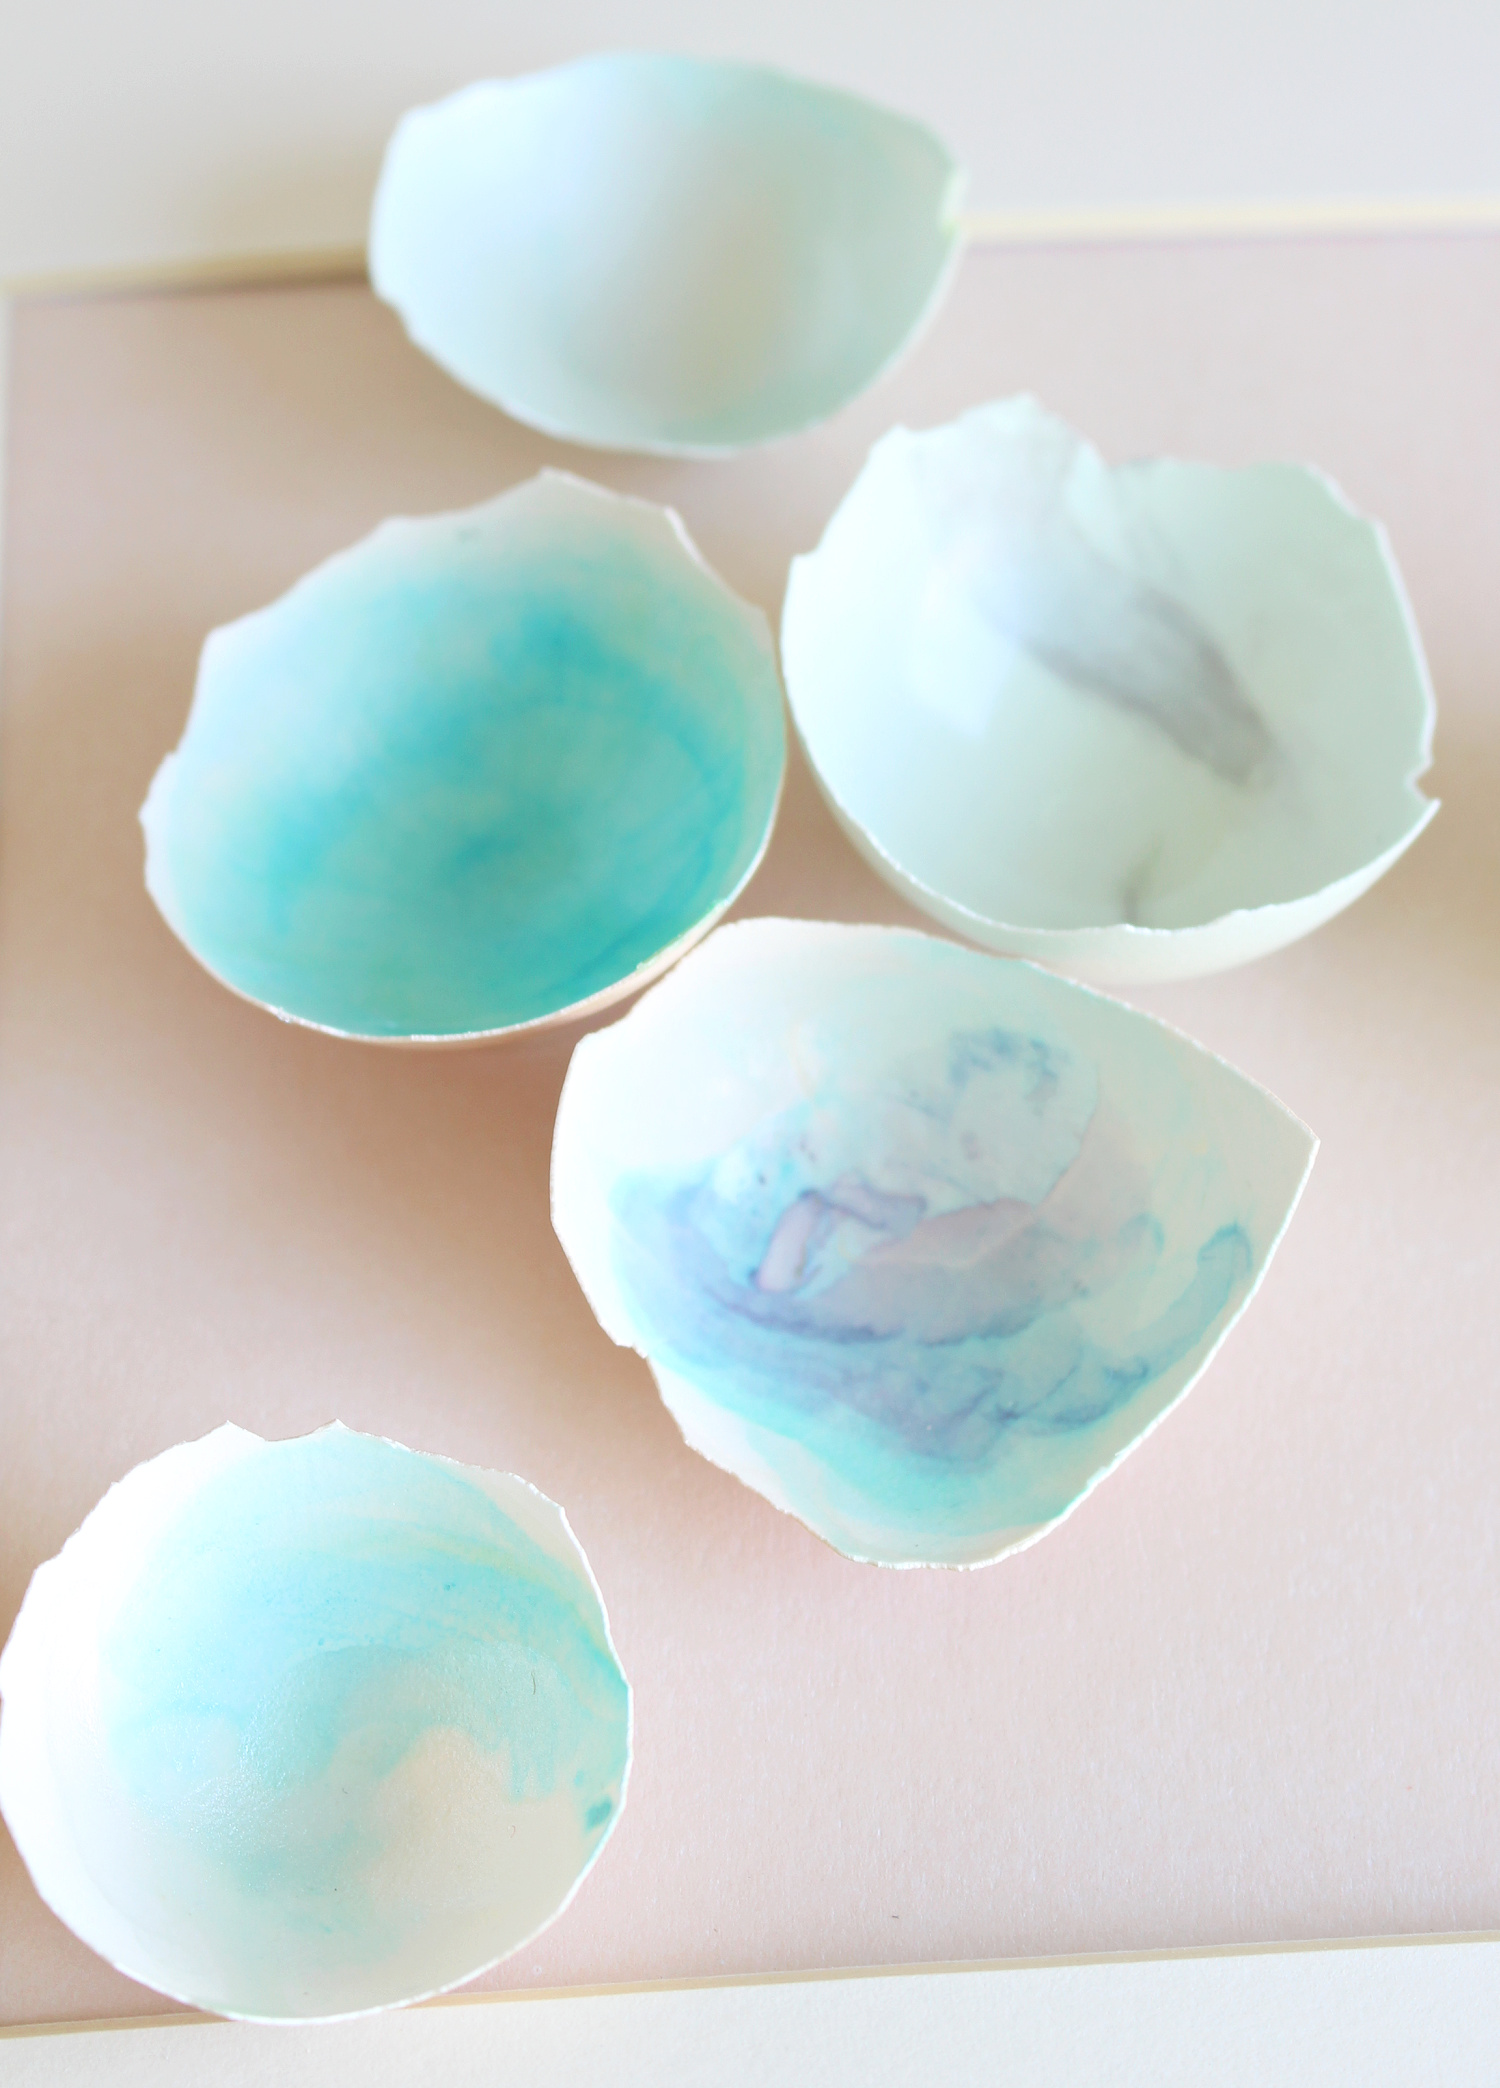 Alcohol Ink Painted Egg Shells